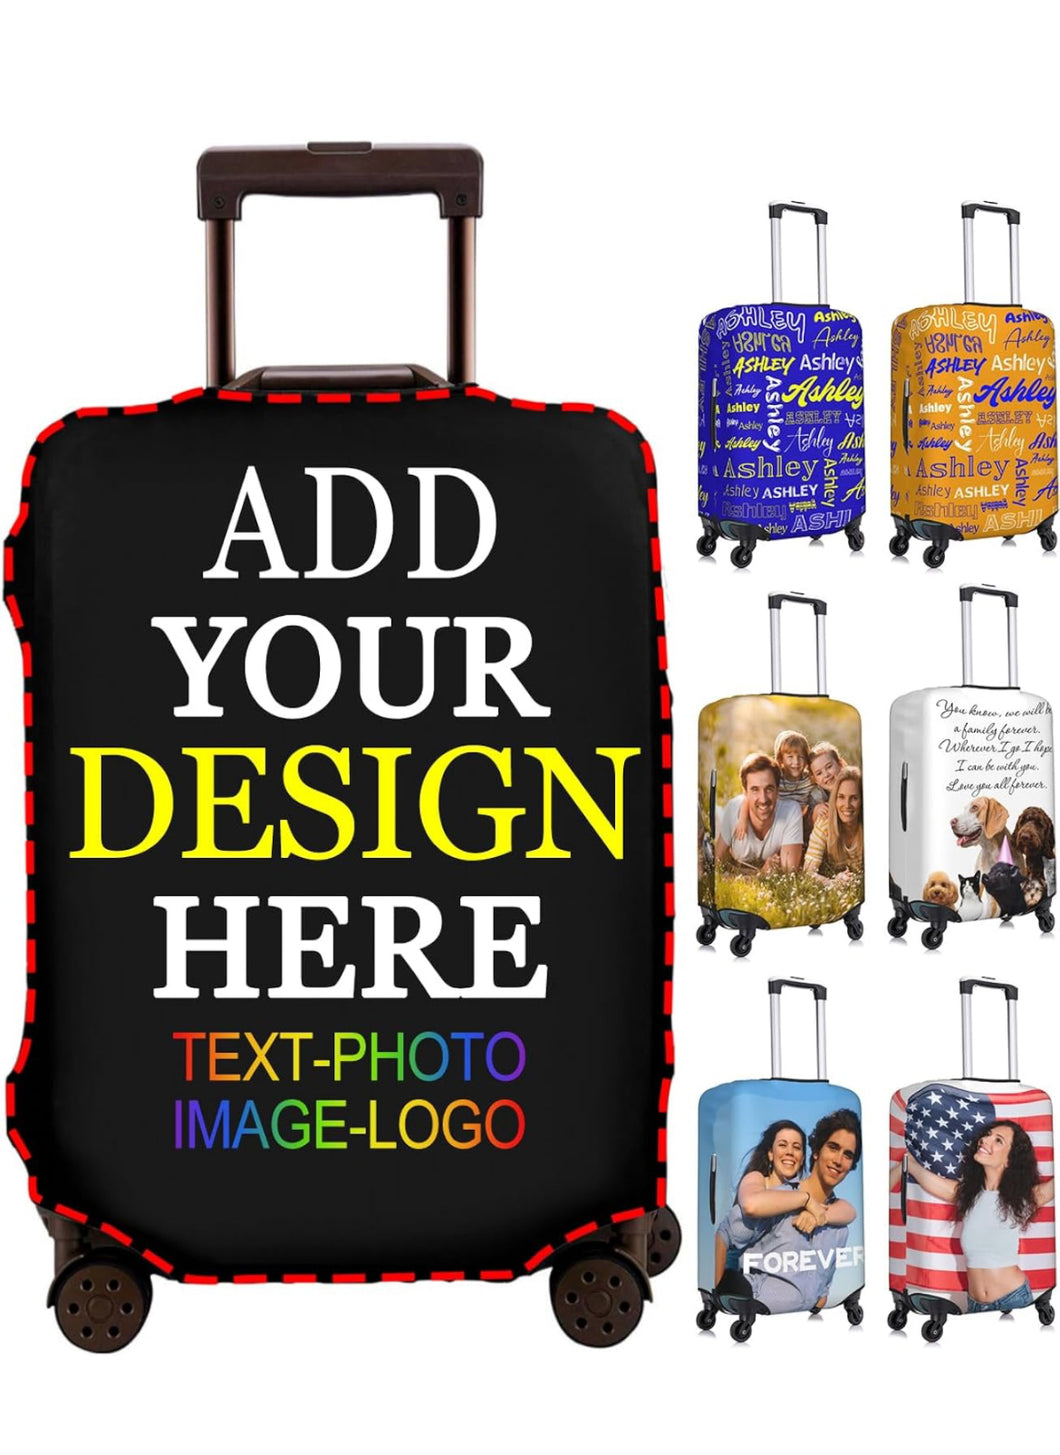 Custom Luggage Cover Personalized Luggage Cover Add Your Own Name Photo Text Double-Sided Different Design Travel Suitcase Case Protector Elastic Washable Baggage Covers